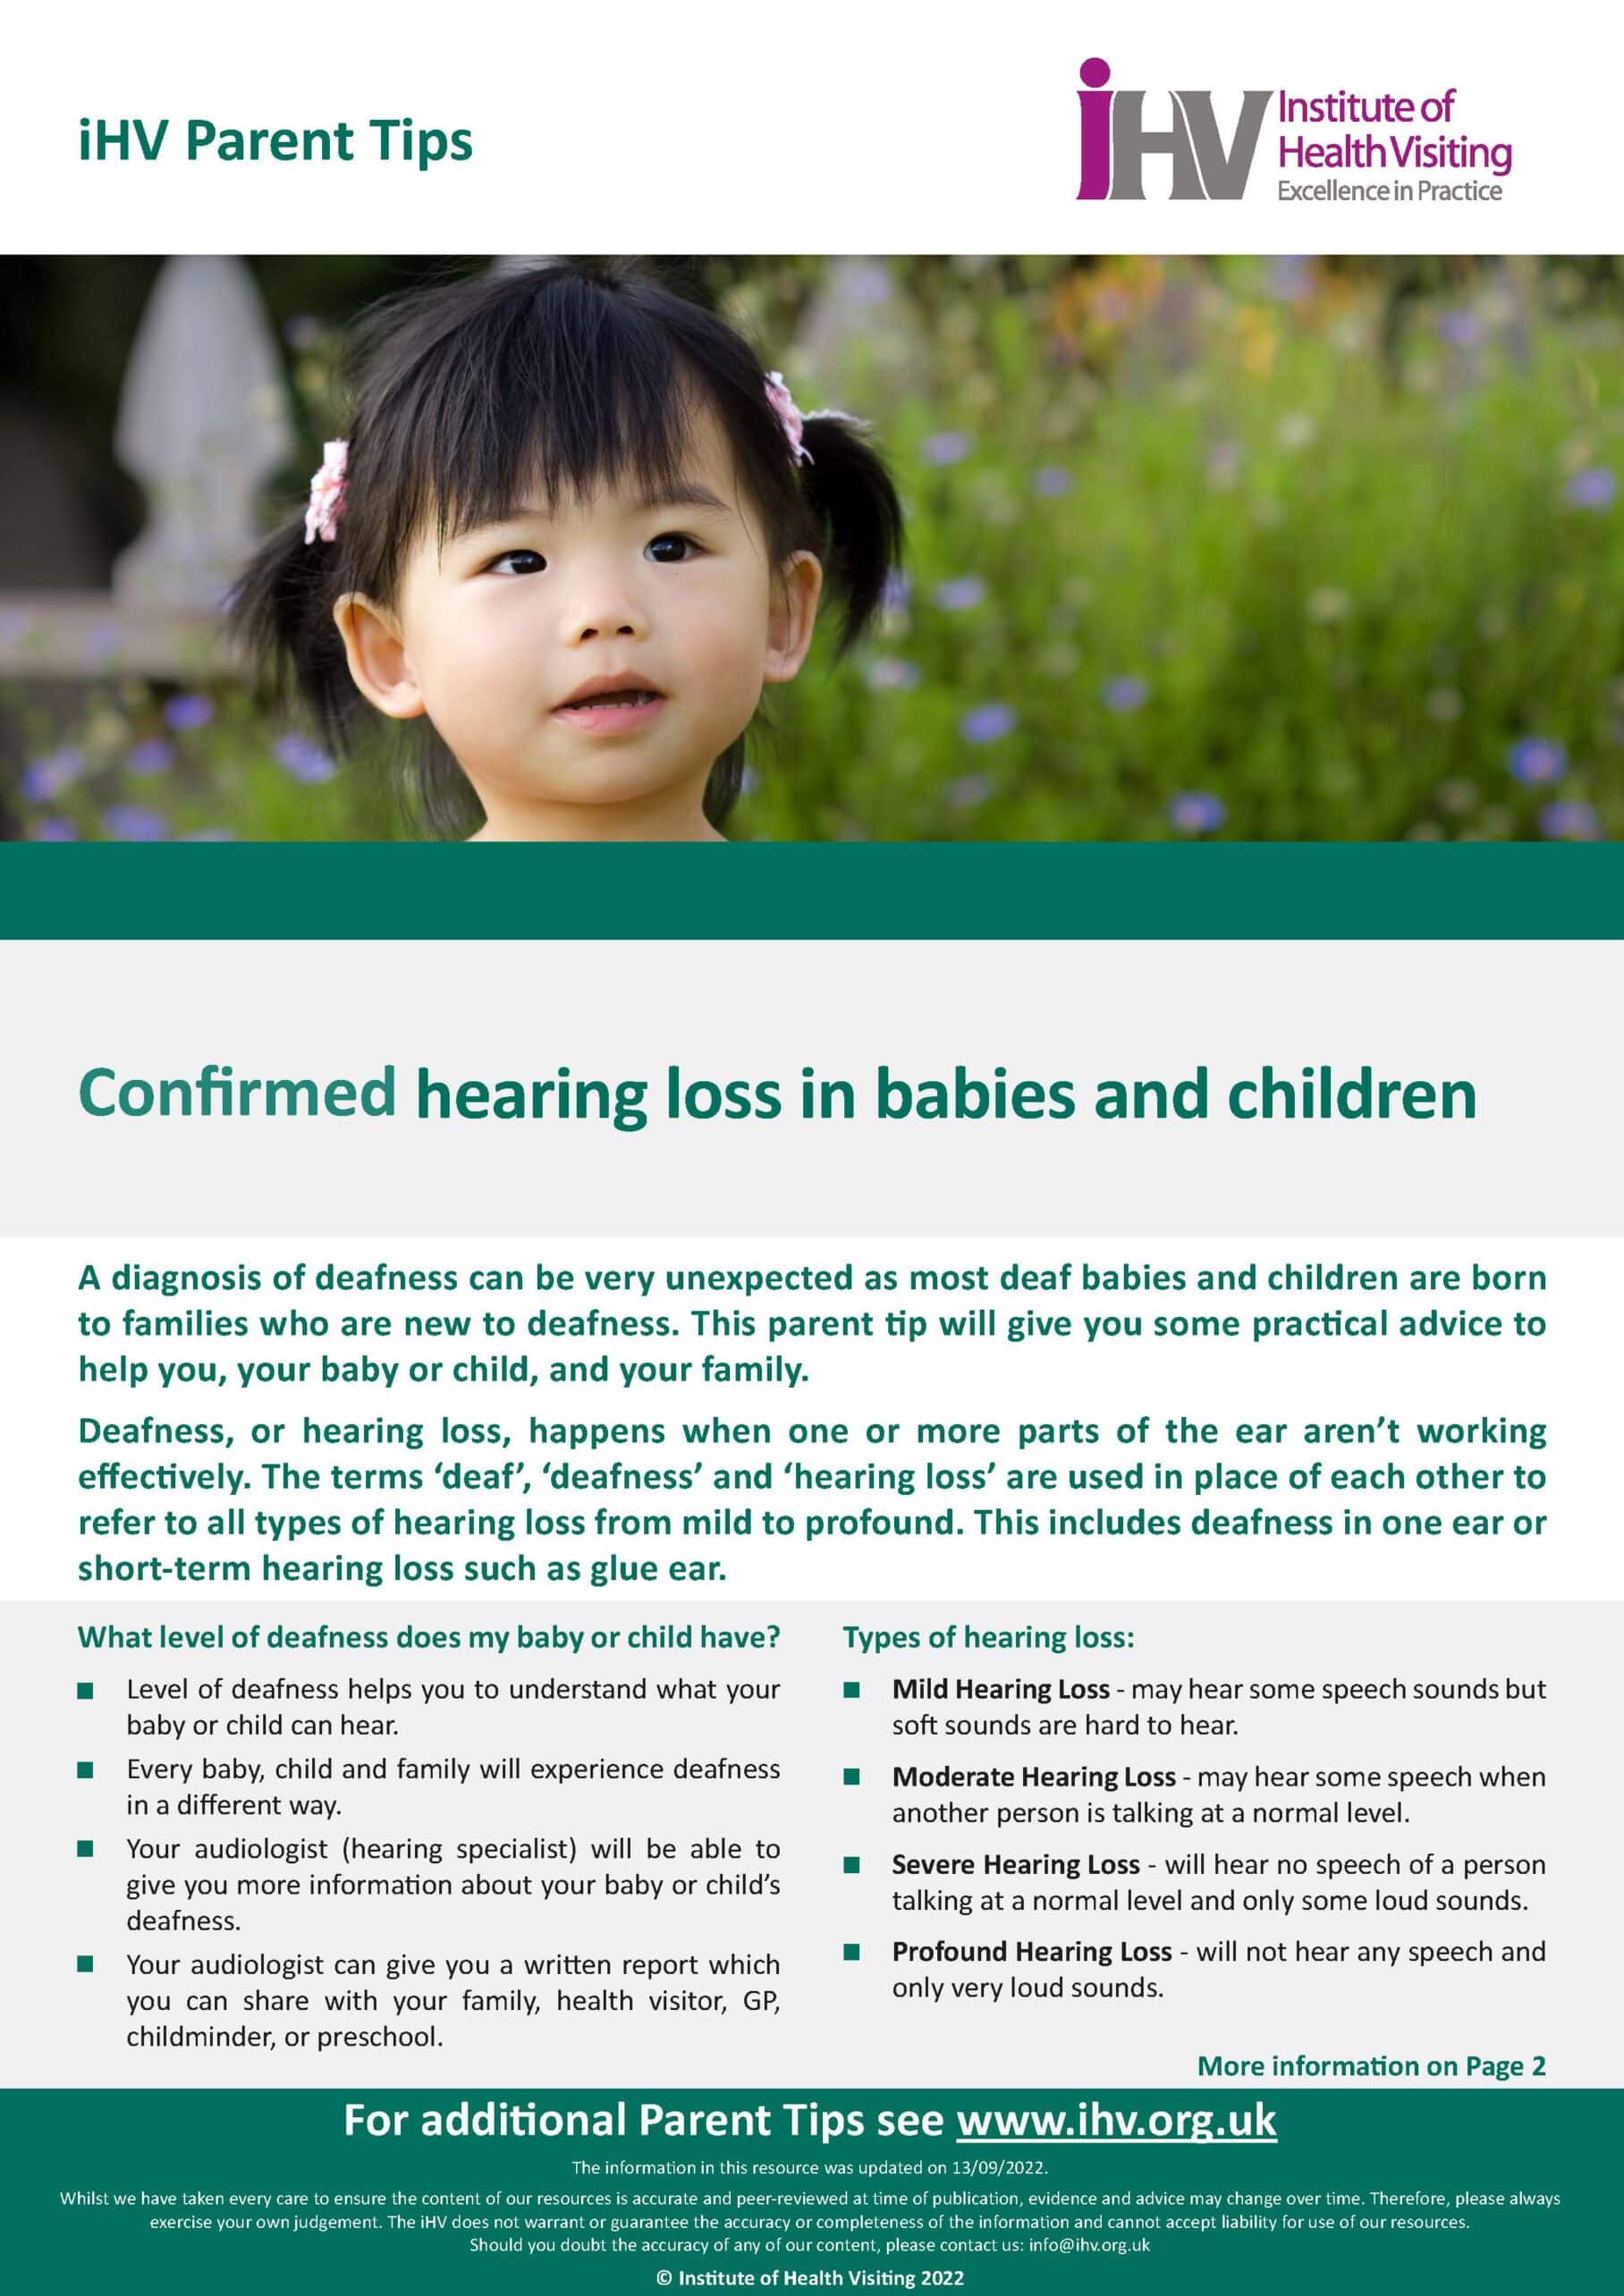 PT – Confirmed hearing loss in babies and children